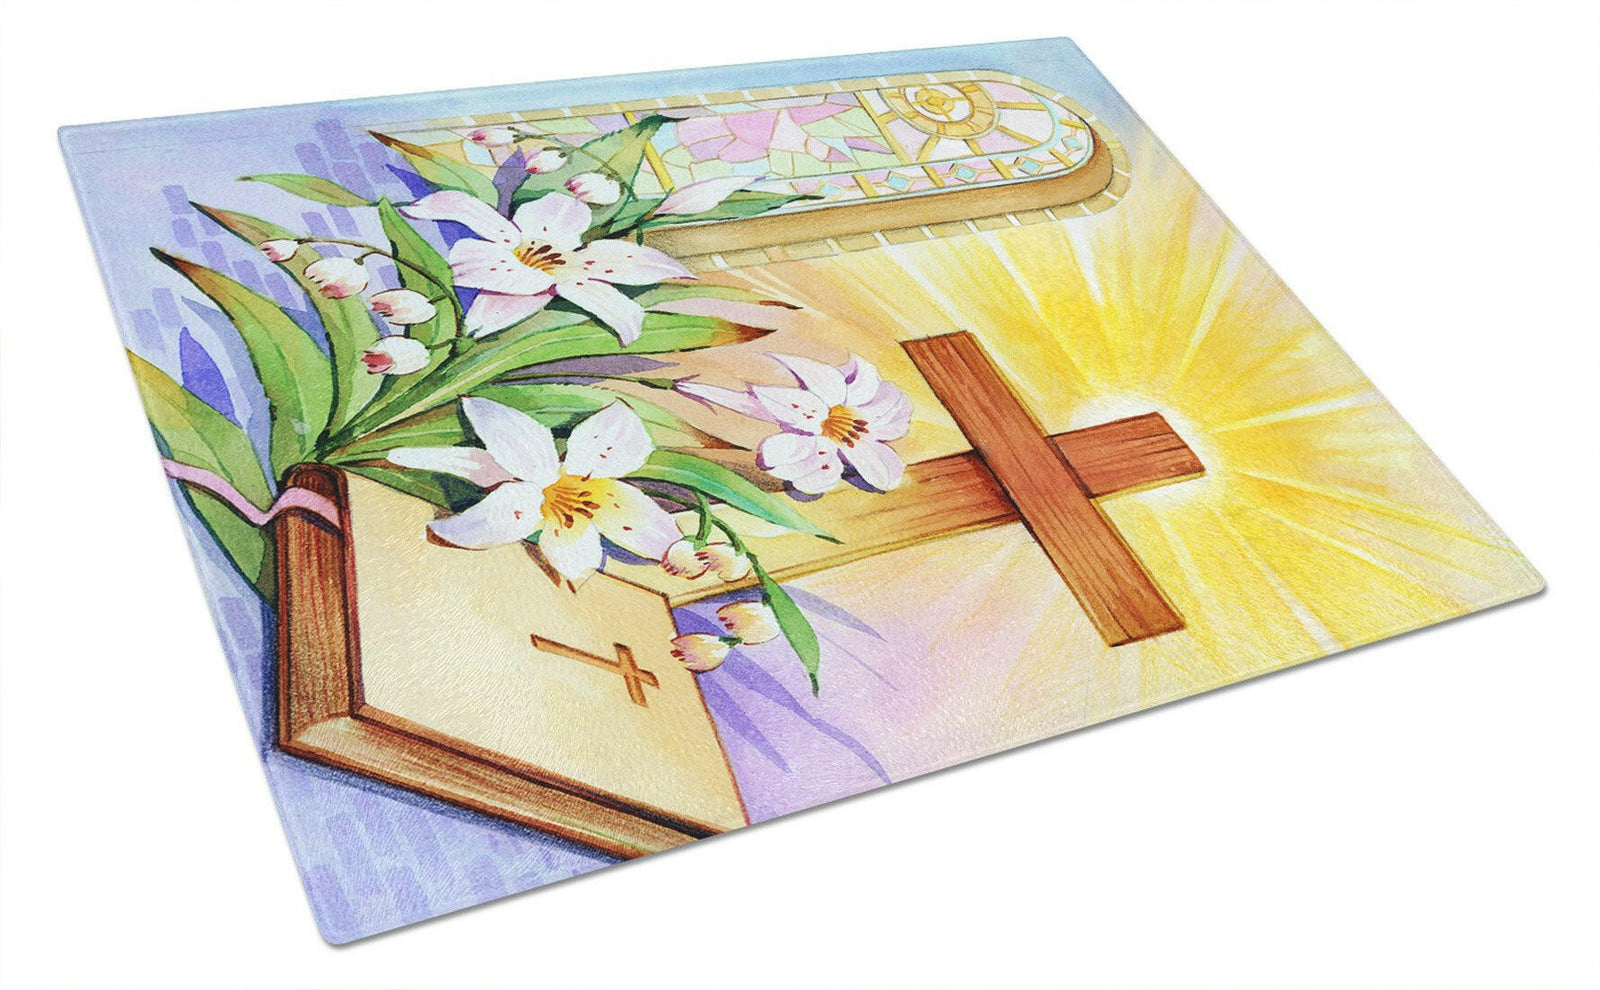 Easter Cross and Bible in Stain Glass Window Glass Cutting Board Large APH5433LCB by Caroline's Treasures